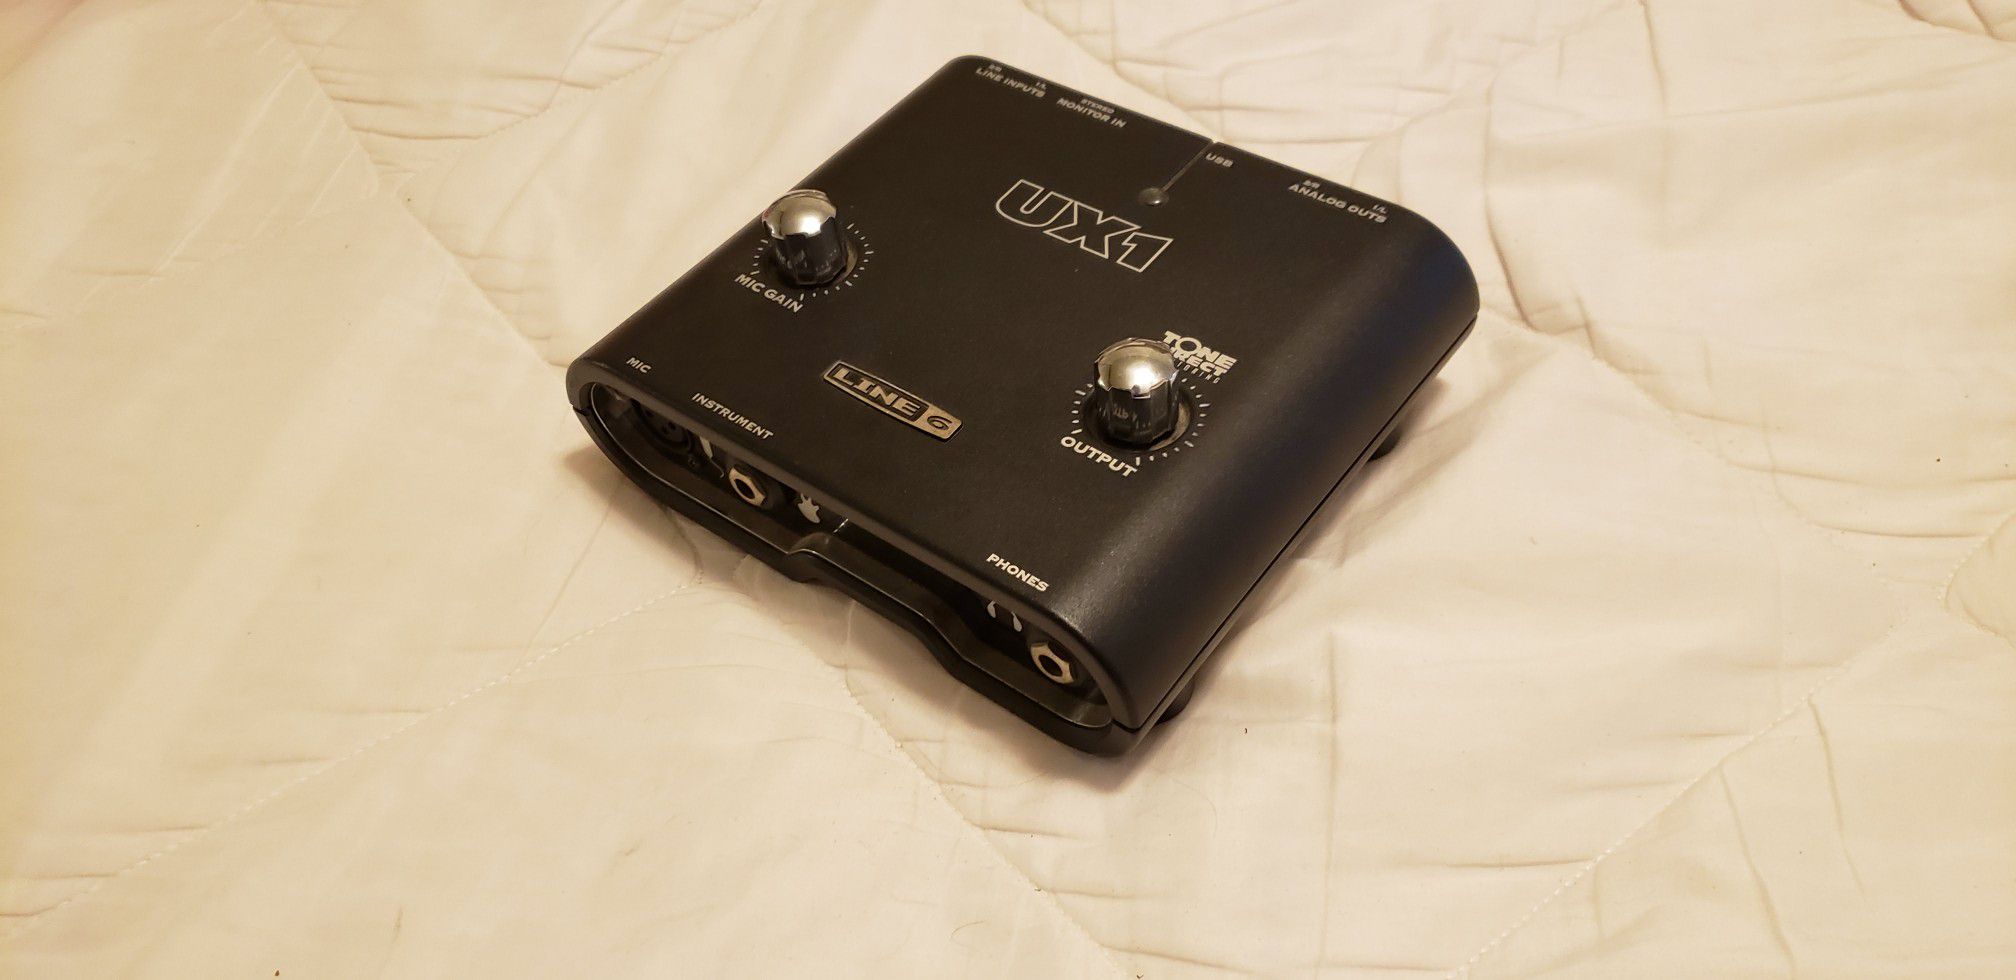 Line 6 UX1 Musical Interface